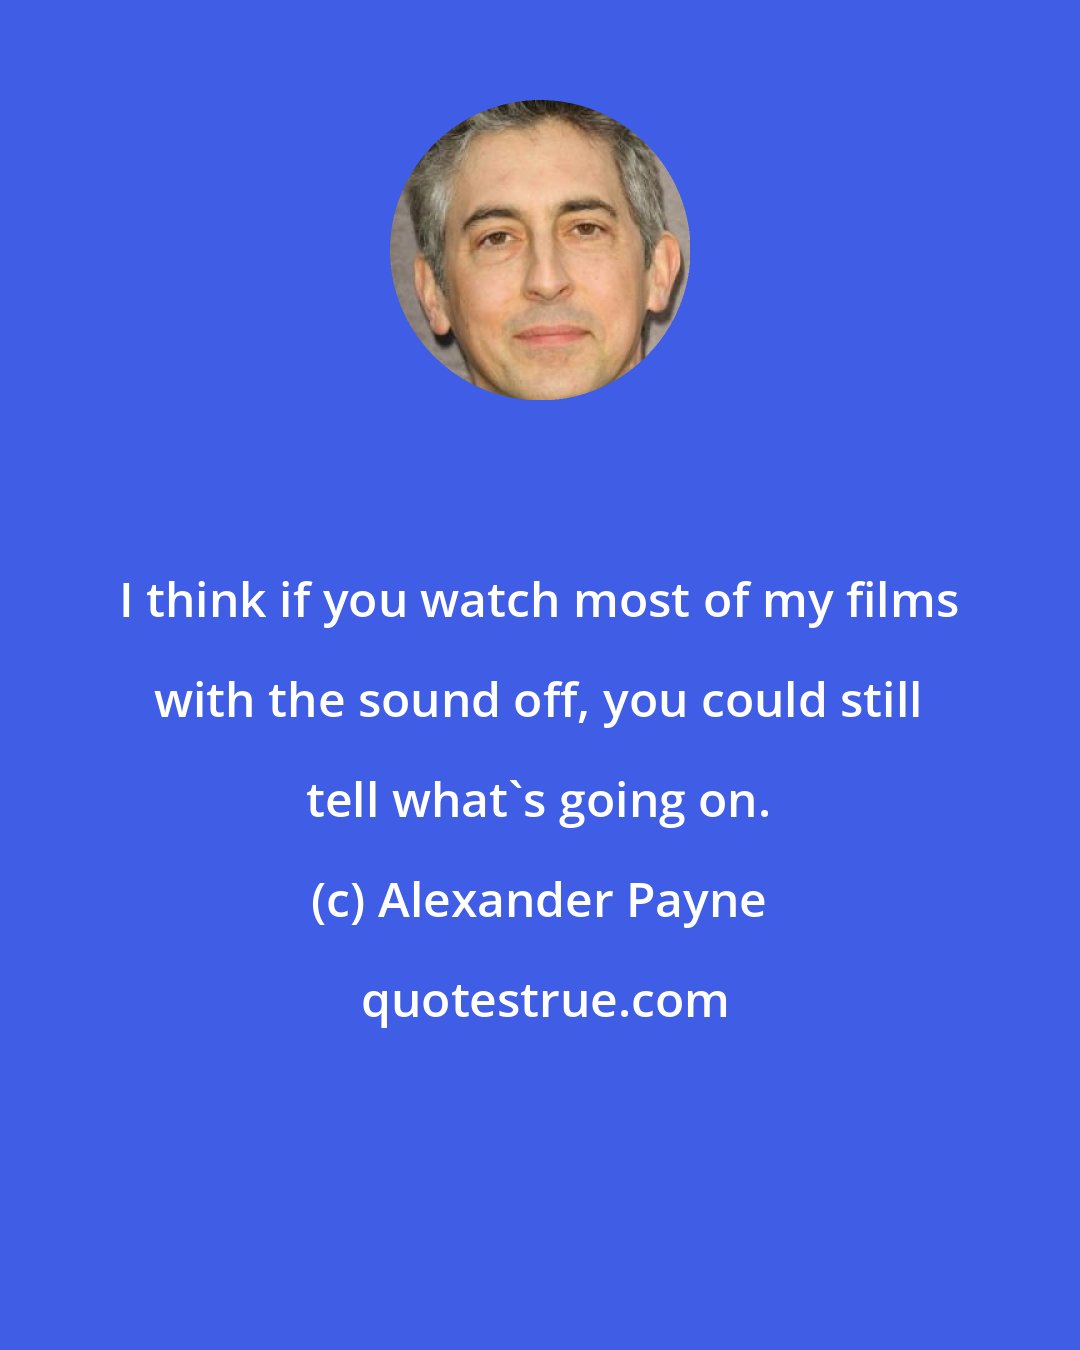 Alexander Payne: I think if you watch most of my films with the sound off, you could still tell what's going on.